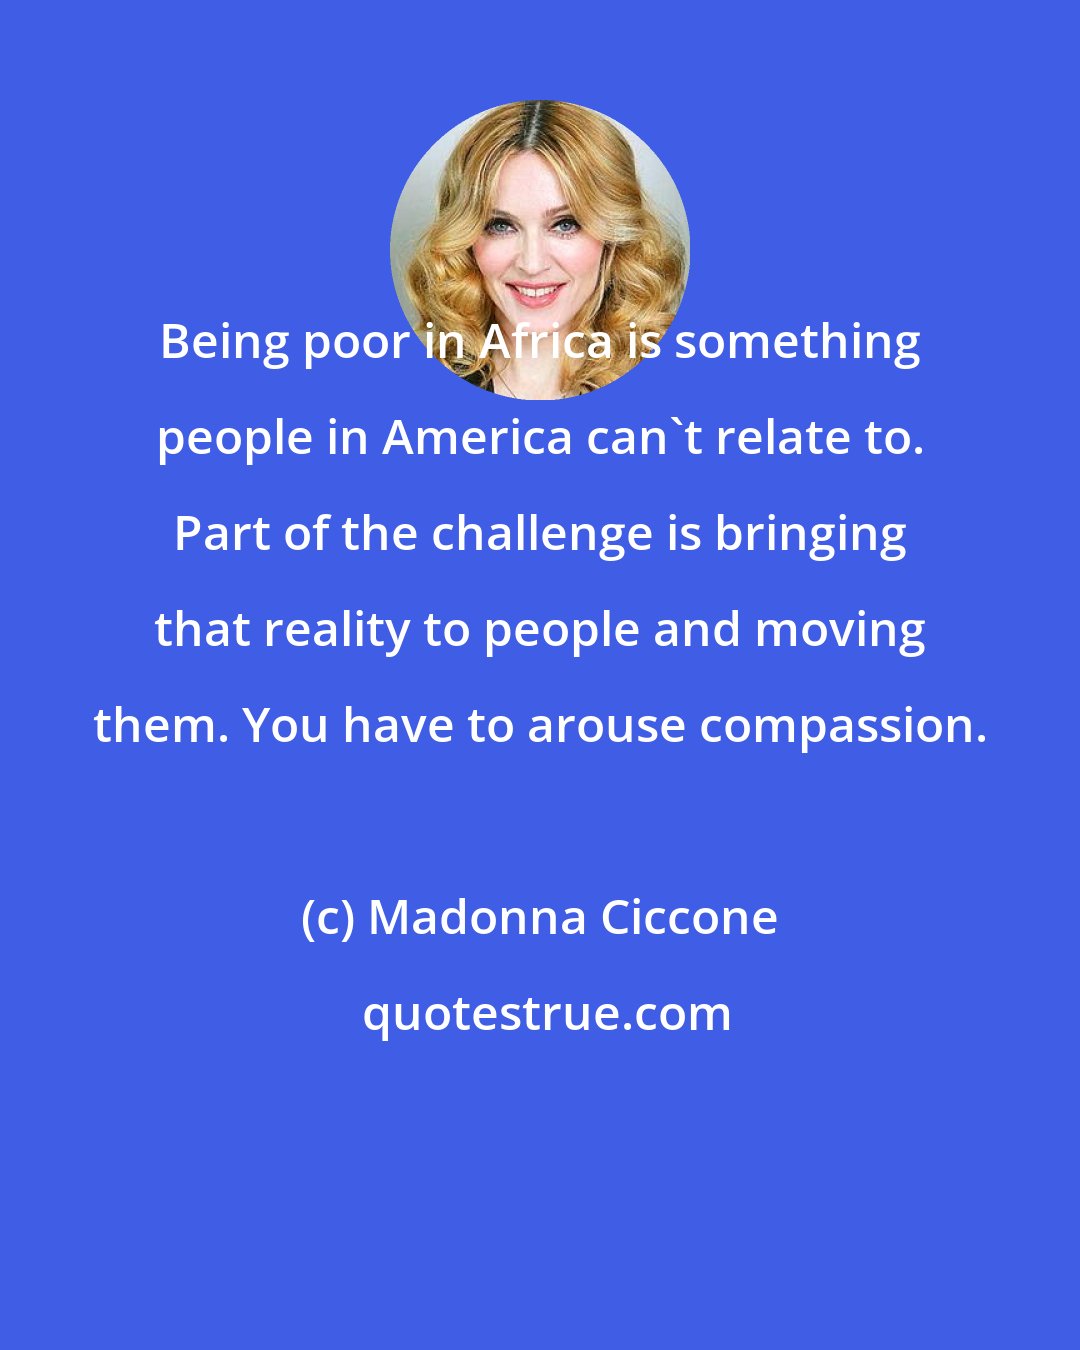 Madonna Ciccone: Being poor in Africa is something people in America can't relate to. Part of the challenge is bringing that reality to people and moving them. You have to arouse compassion.